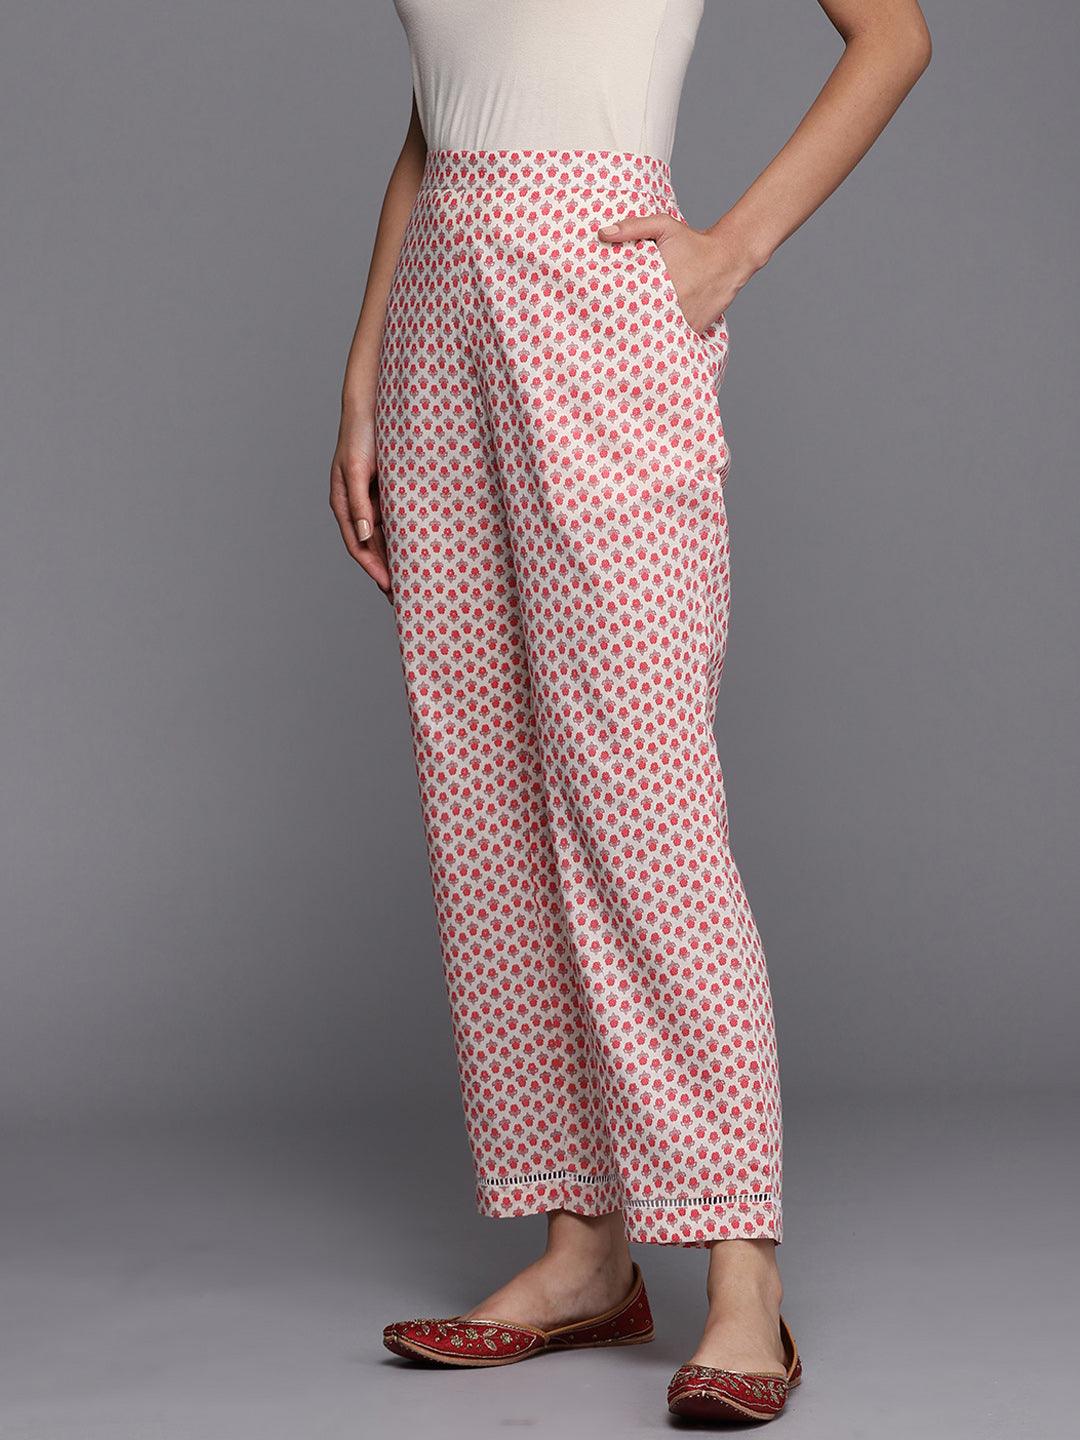 Off White Printed Cotton Trousers - Libas